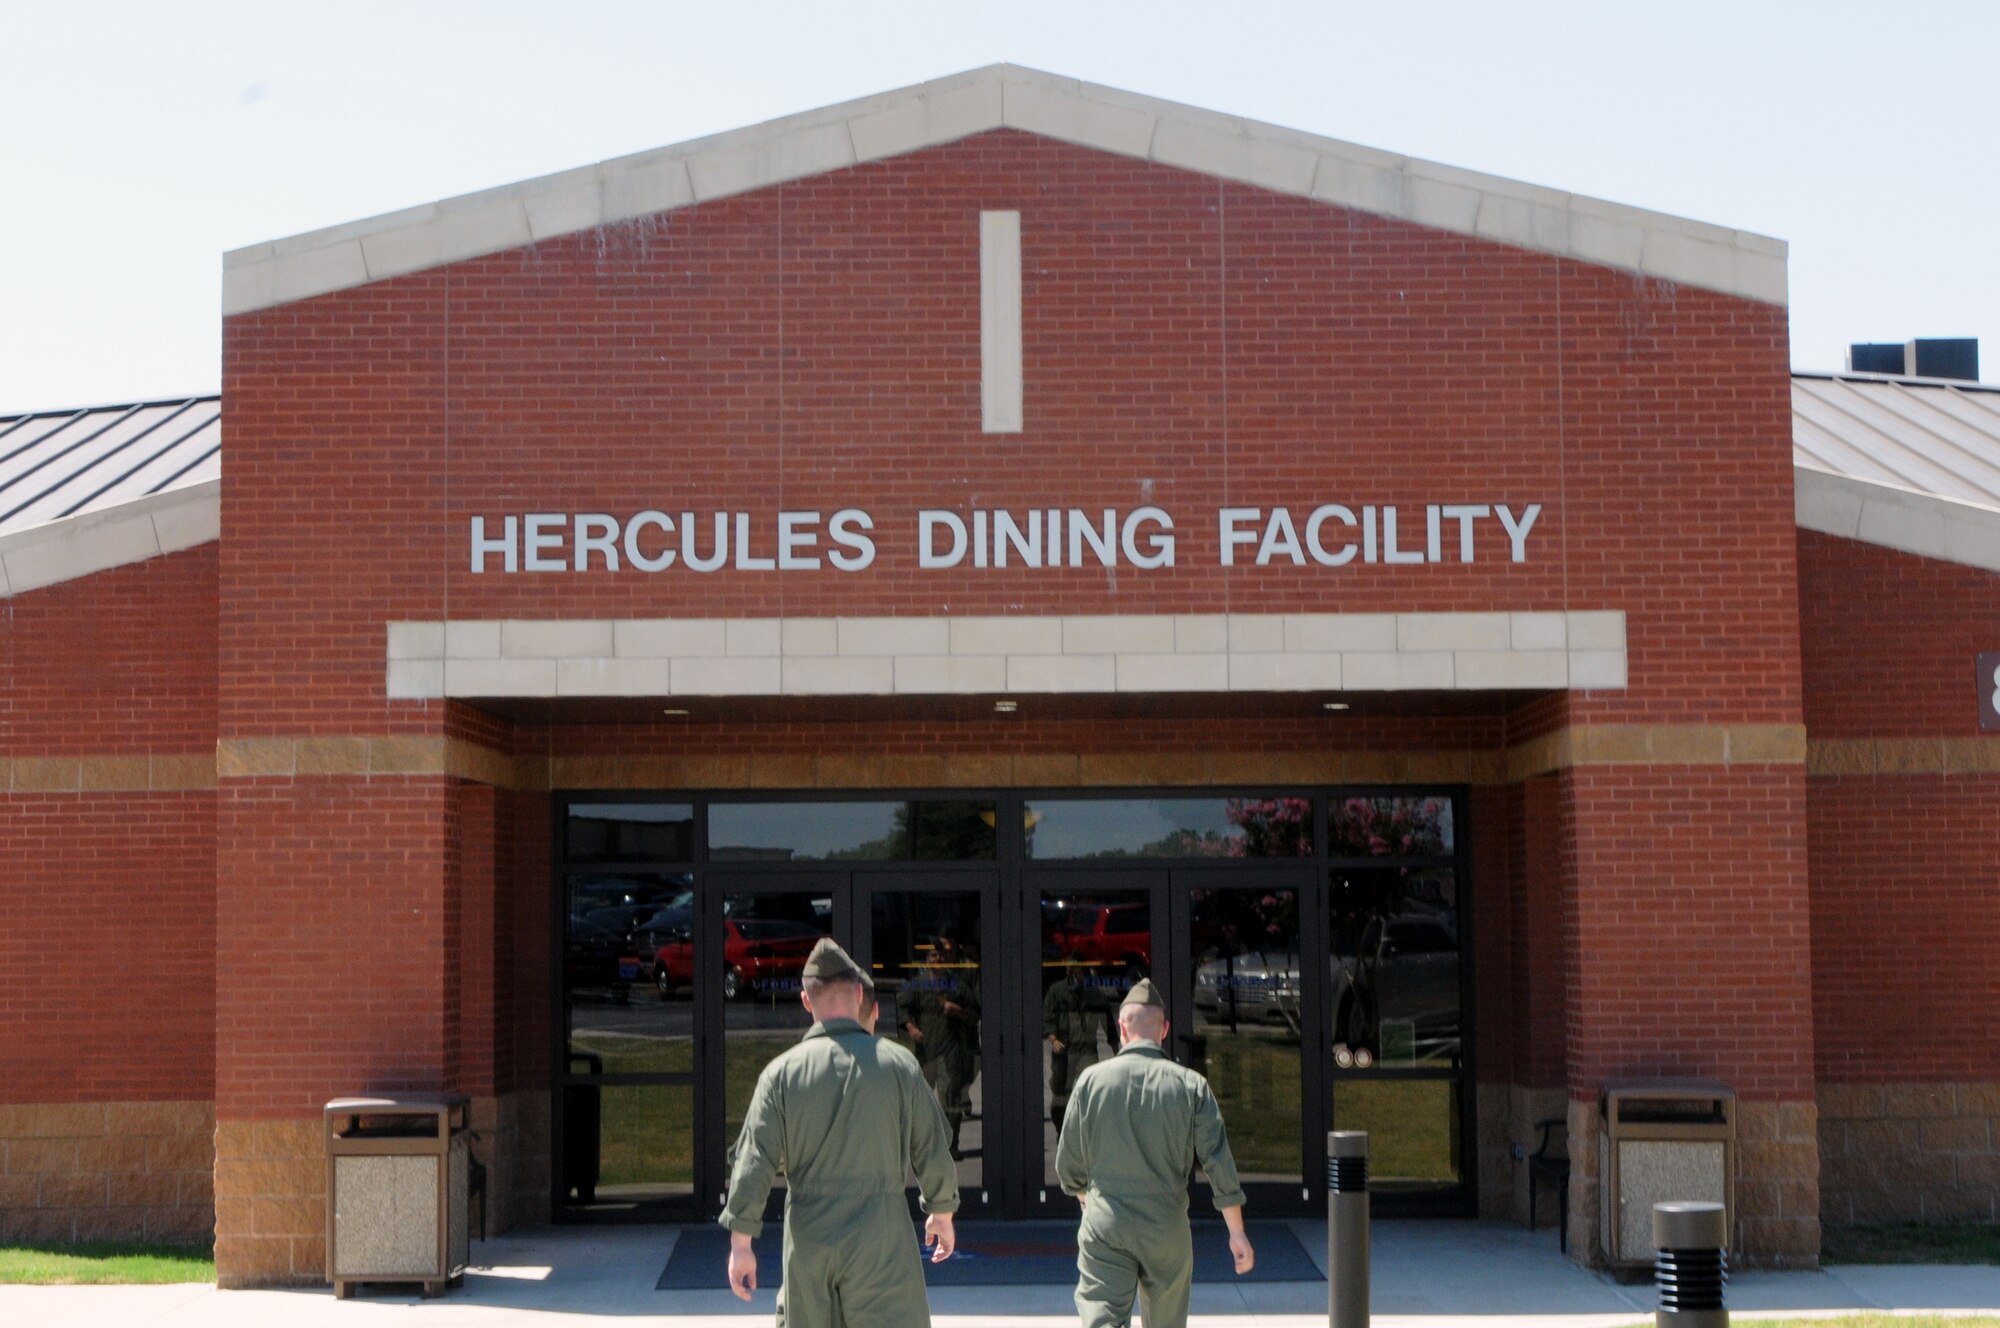 Servicemembers walk to the Hercules Dining Facility Aug. 23. The dining facility opened at its current location in October 2009 and has served more than 21,500 meals each month to meal card holders and other authorized users. (Courtesy photo by Ashley Mangin)